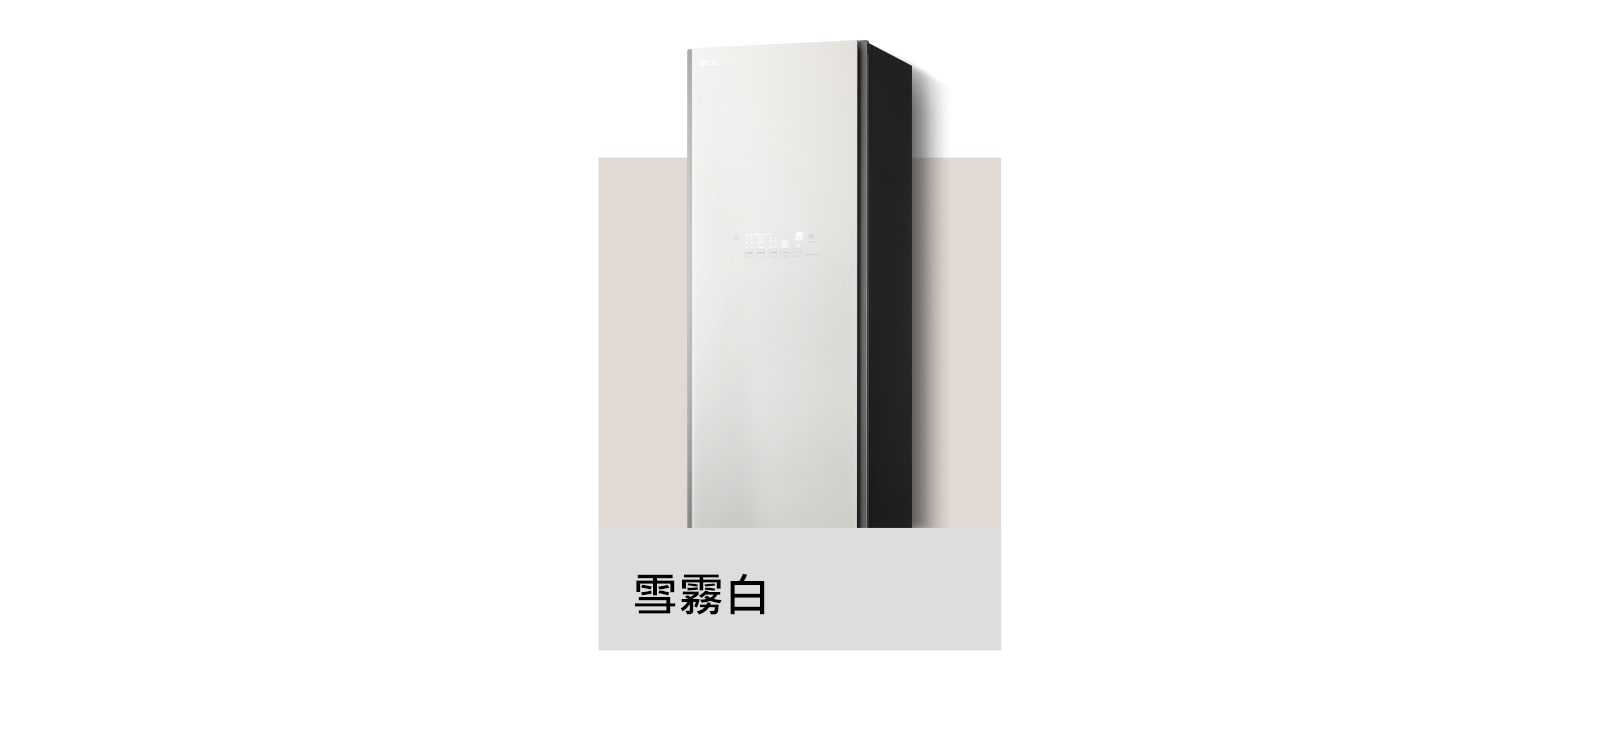 It shows the mist green and mist beige color LG Styler Objet Collection.